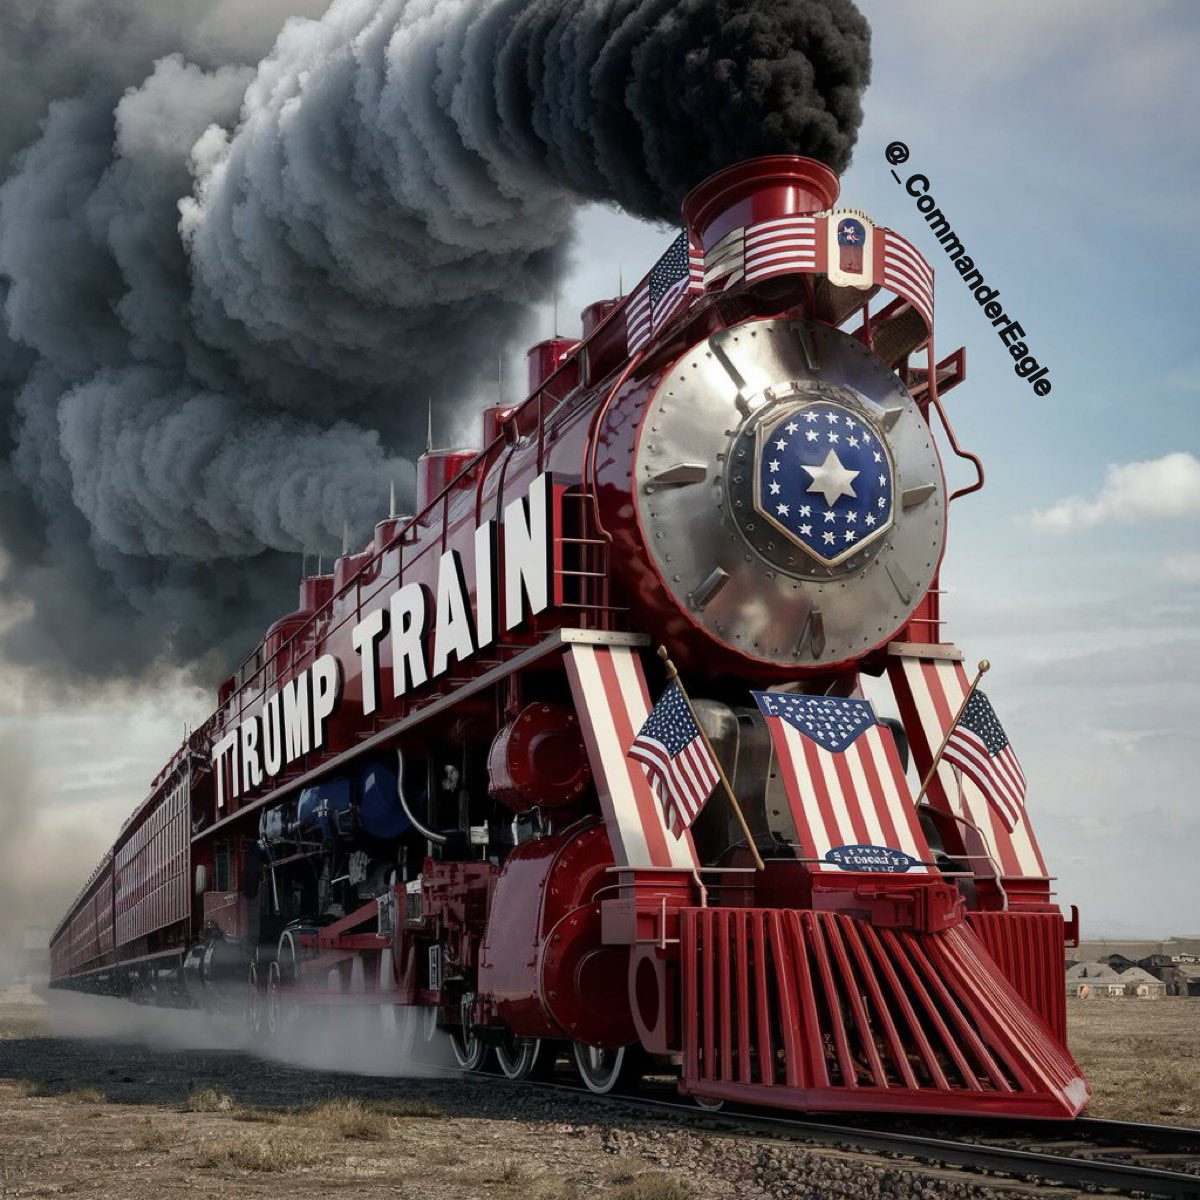 WEDNESDAY EVENING PATRIOT TRAIN! ALL ABOARD! 🚂 💨 🚂 💨 🚂 💨 💨 PLEASE REPOST & FOLLOW BACK ALL PATRIOTS! 🇺🇸🇺🇸🇺🇸 COMMENT WITH YOUR HANDLE IN IT INCLUDE EMOJIS & MEMES ETC TO STAND OUT 🔥🔥🔥 REPOST ↪️ = MORE GROWTH! GROW TOGETHER!!! 💪💪💪 GOD…